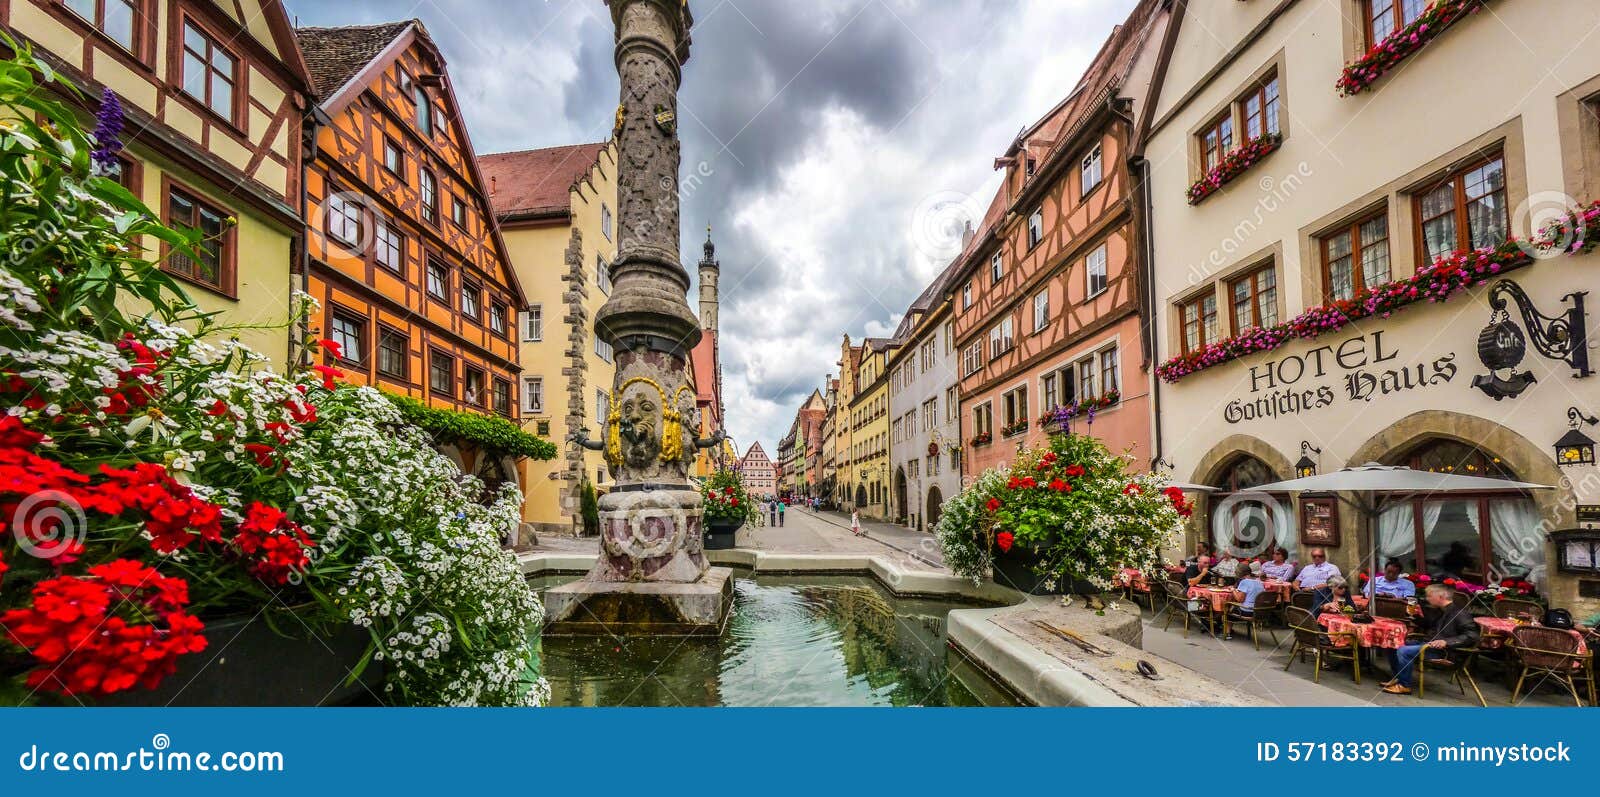 beautiful view of the historic town of rothenburg ob der tauber with fountain, franconia, bavaria, germany